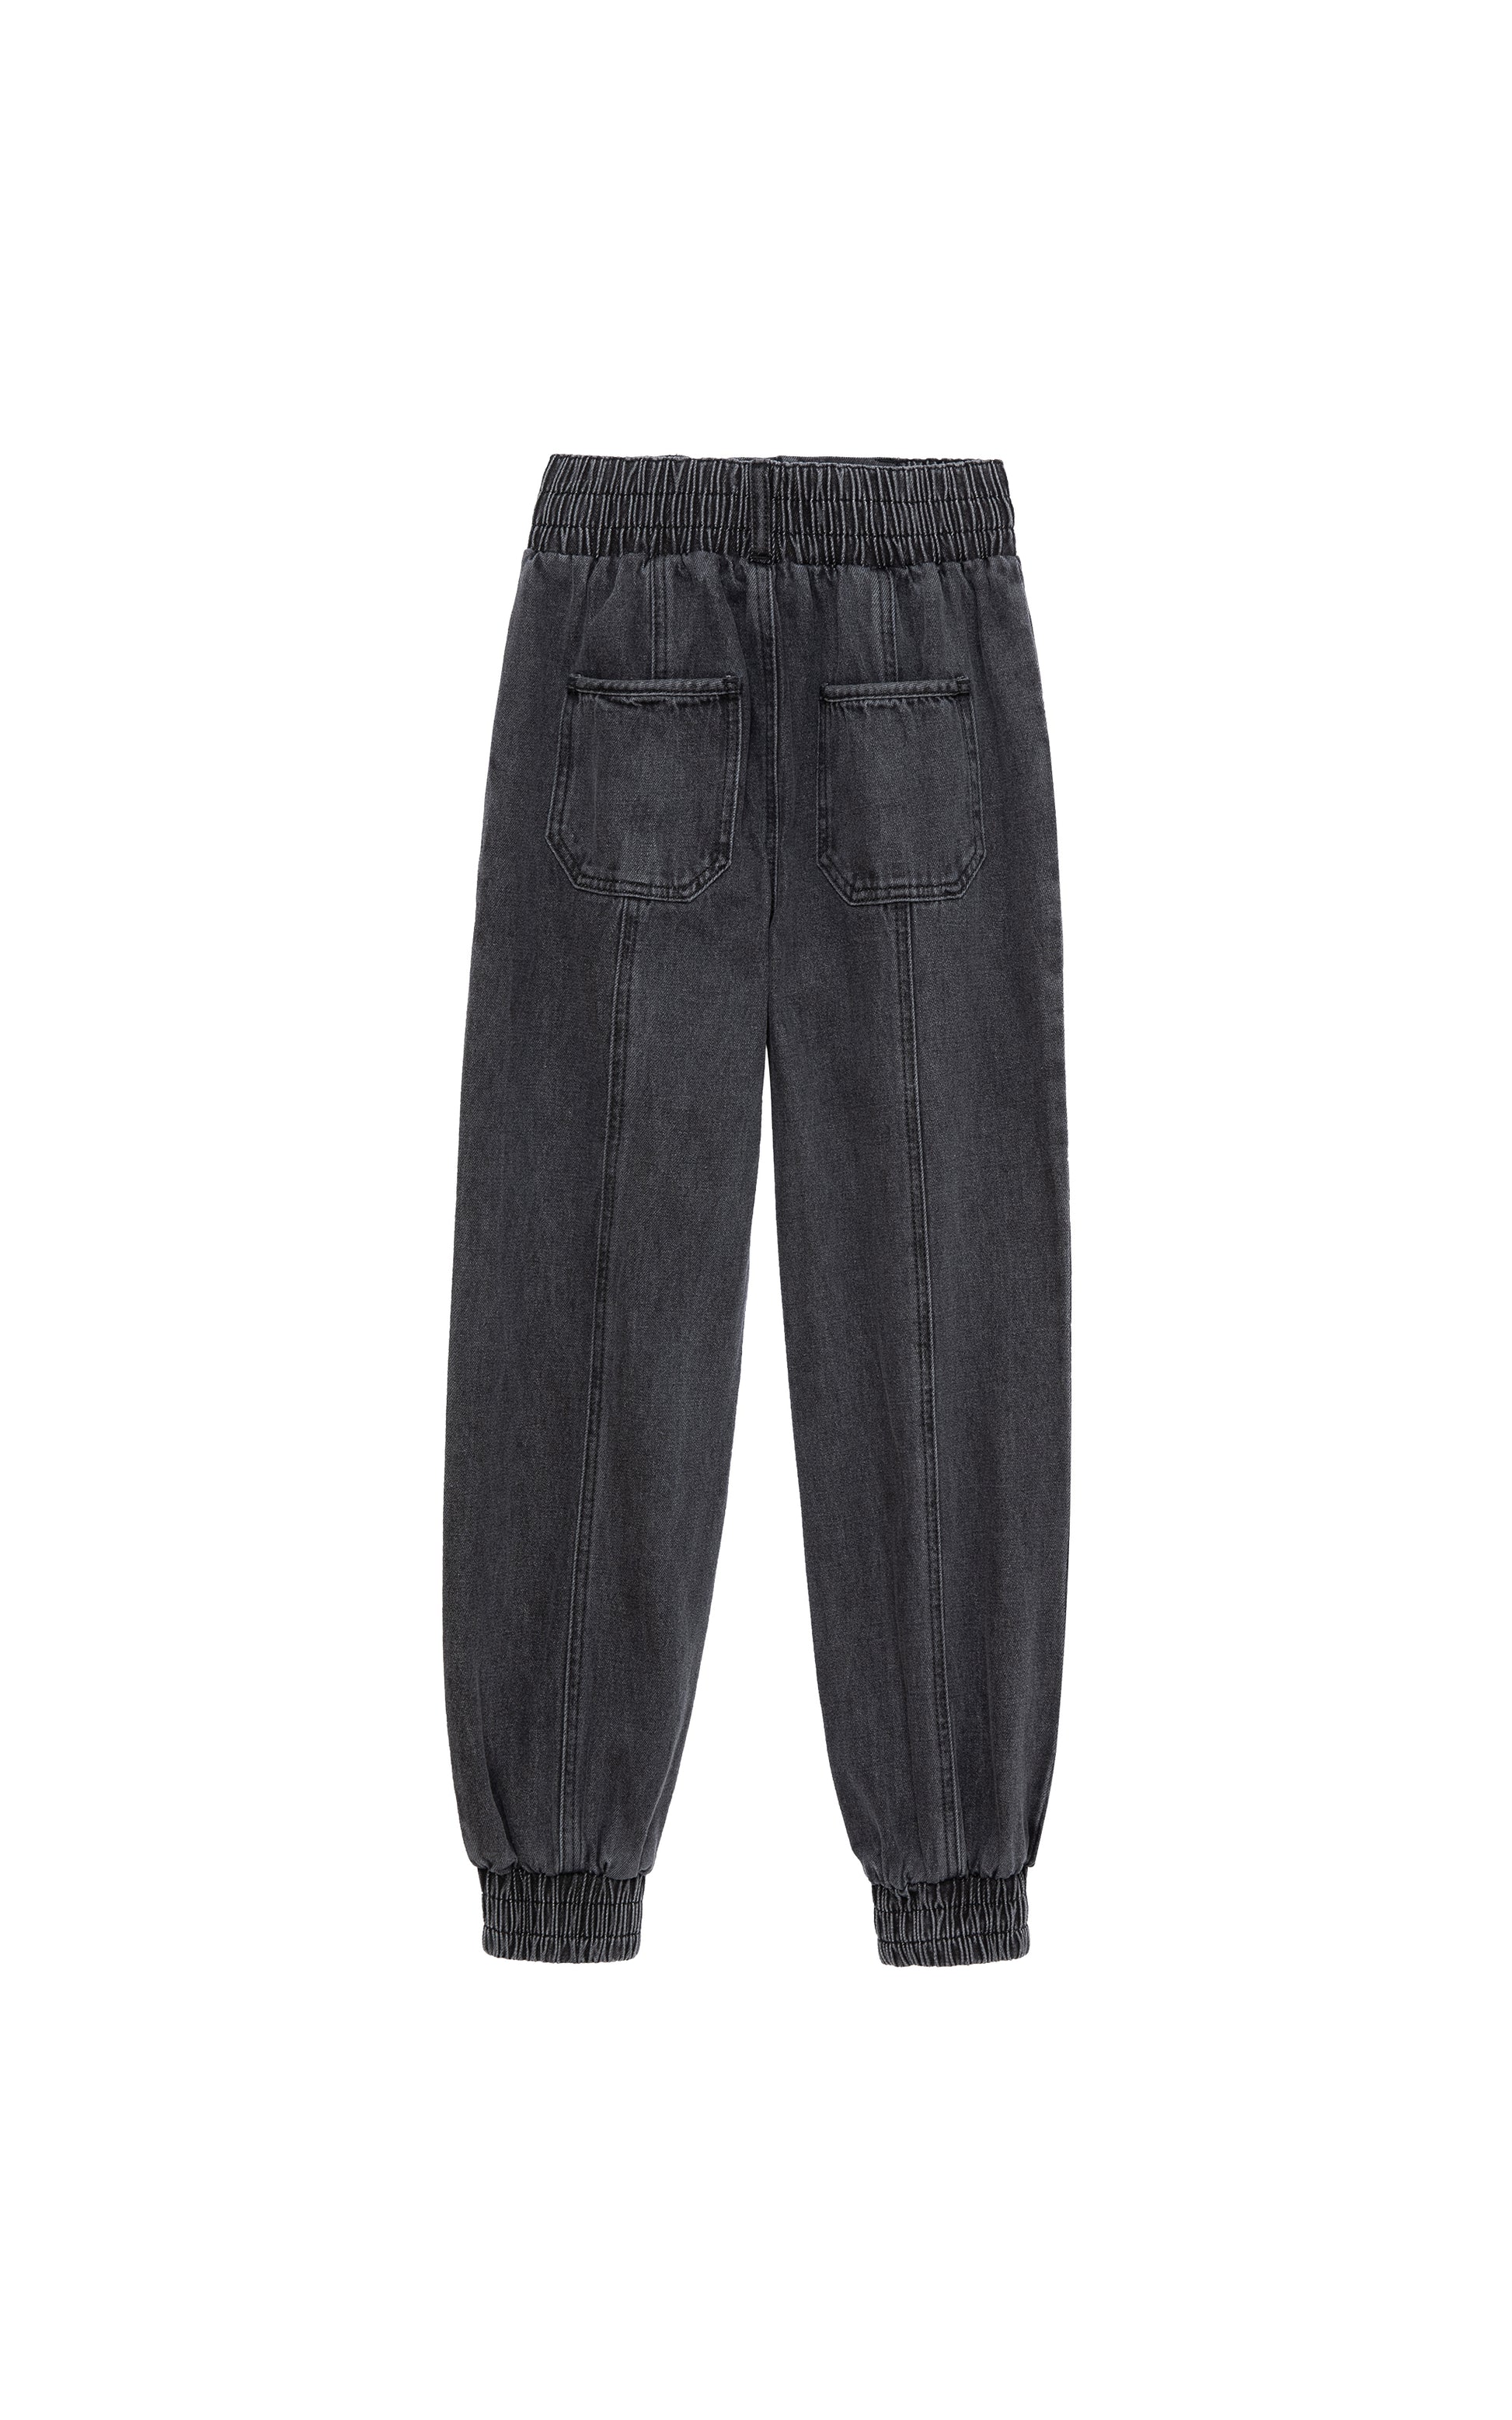 BACK OF WASHED OUT BLACK DENIM PANTS WITH RUCHED ELASTIC WAISTBAND AND CUFFED ANKLES